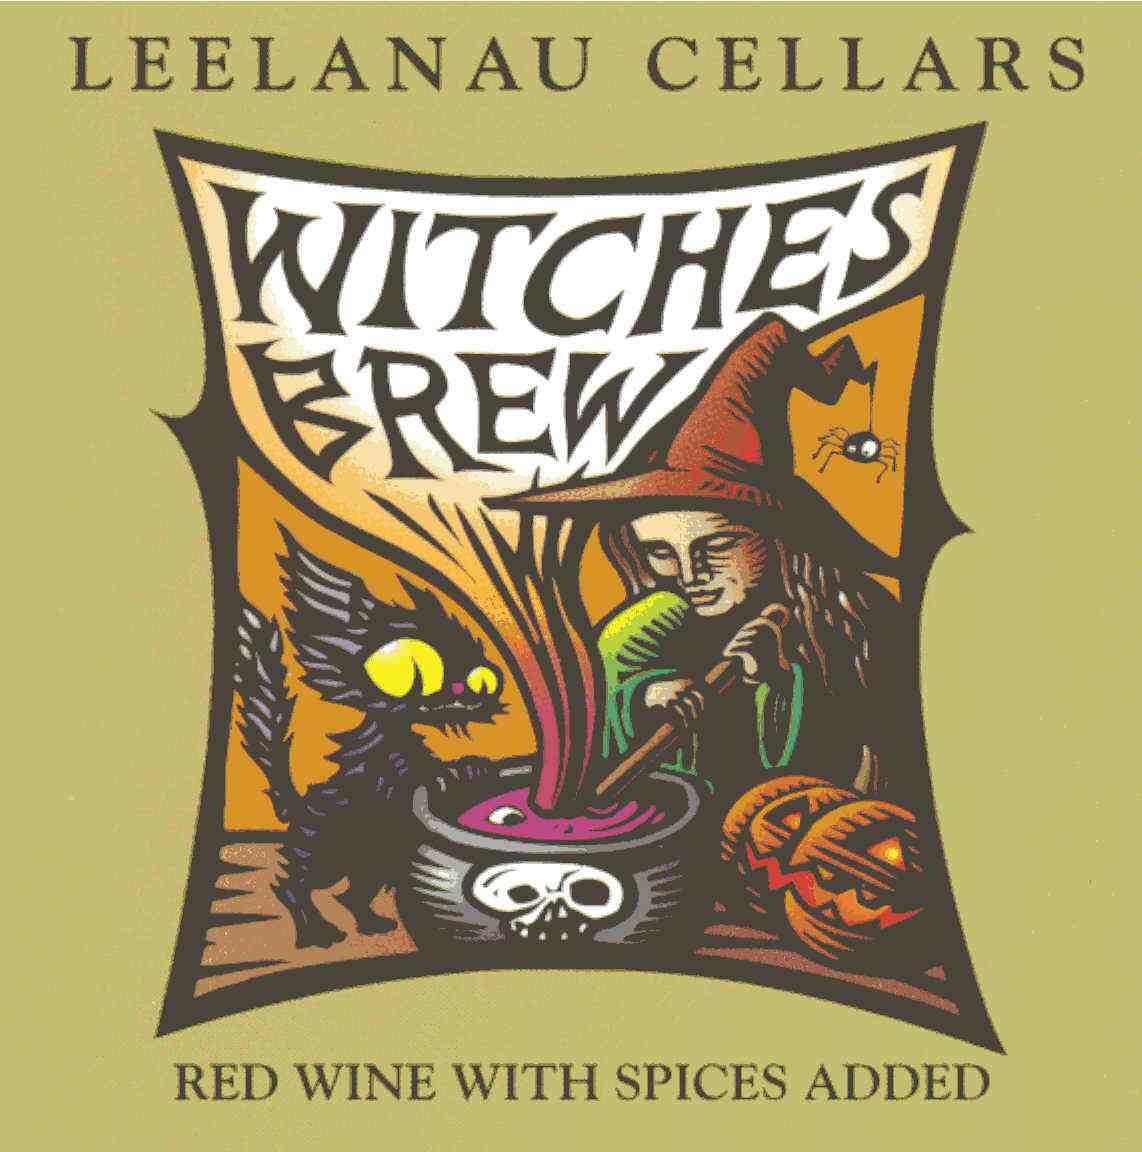 Spiced Wine or Witches Brew